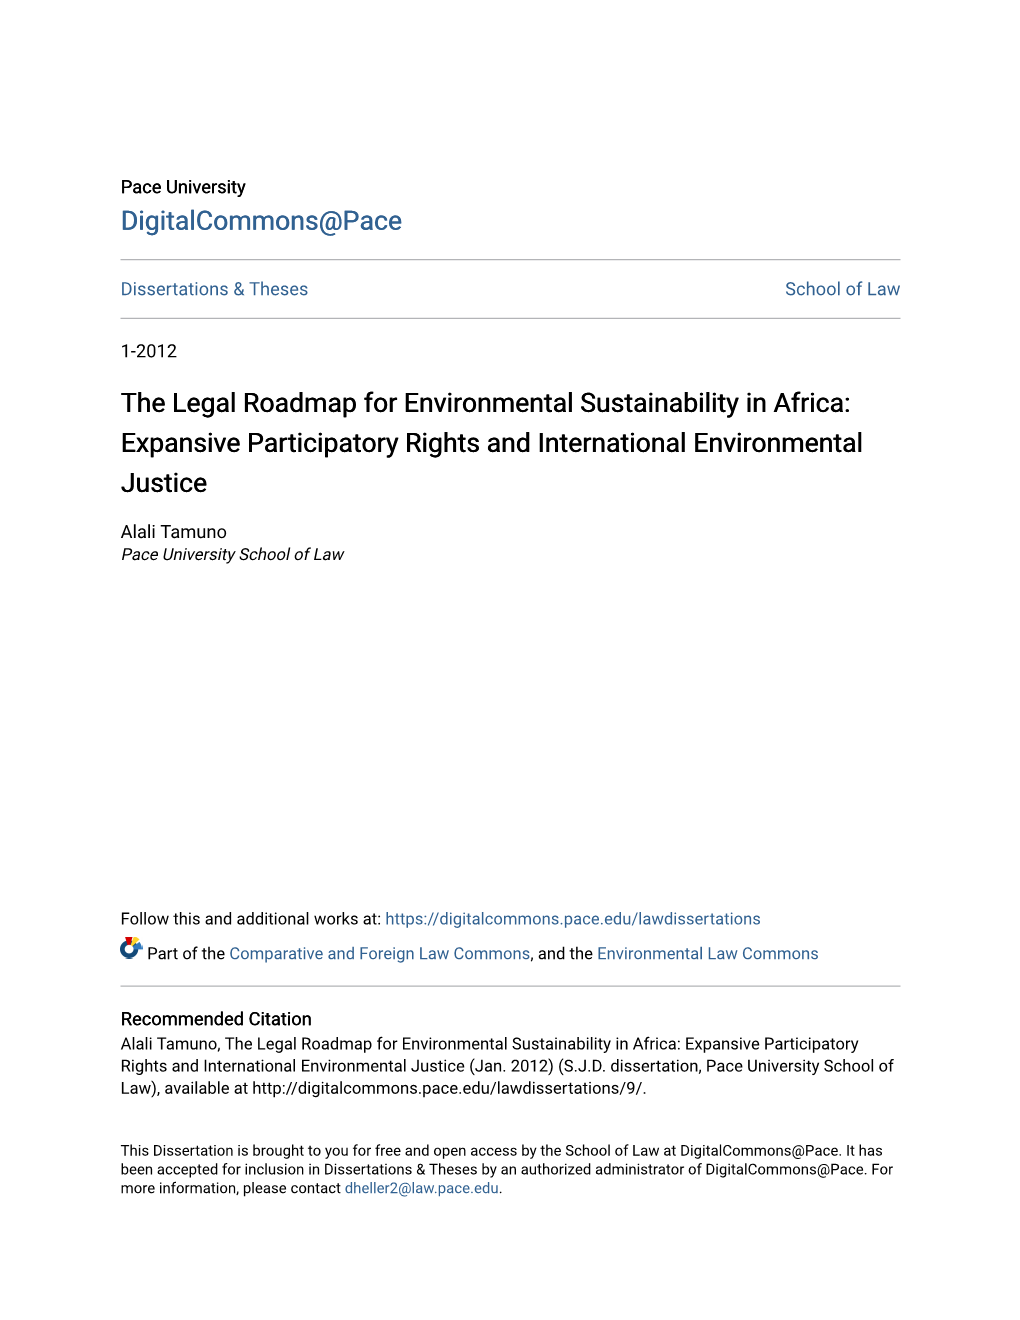 The Legal Roadmap for Environmental Sustainability in Africa: Expansive Participatory Rights and International Environmental Justice